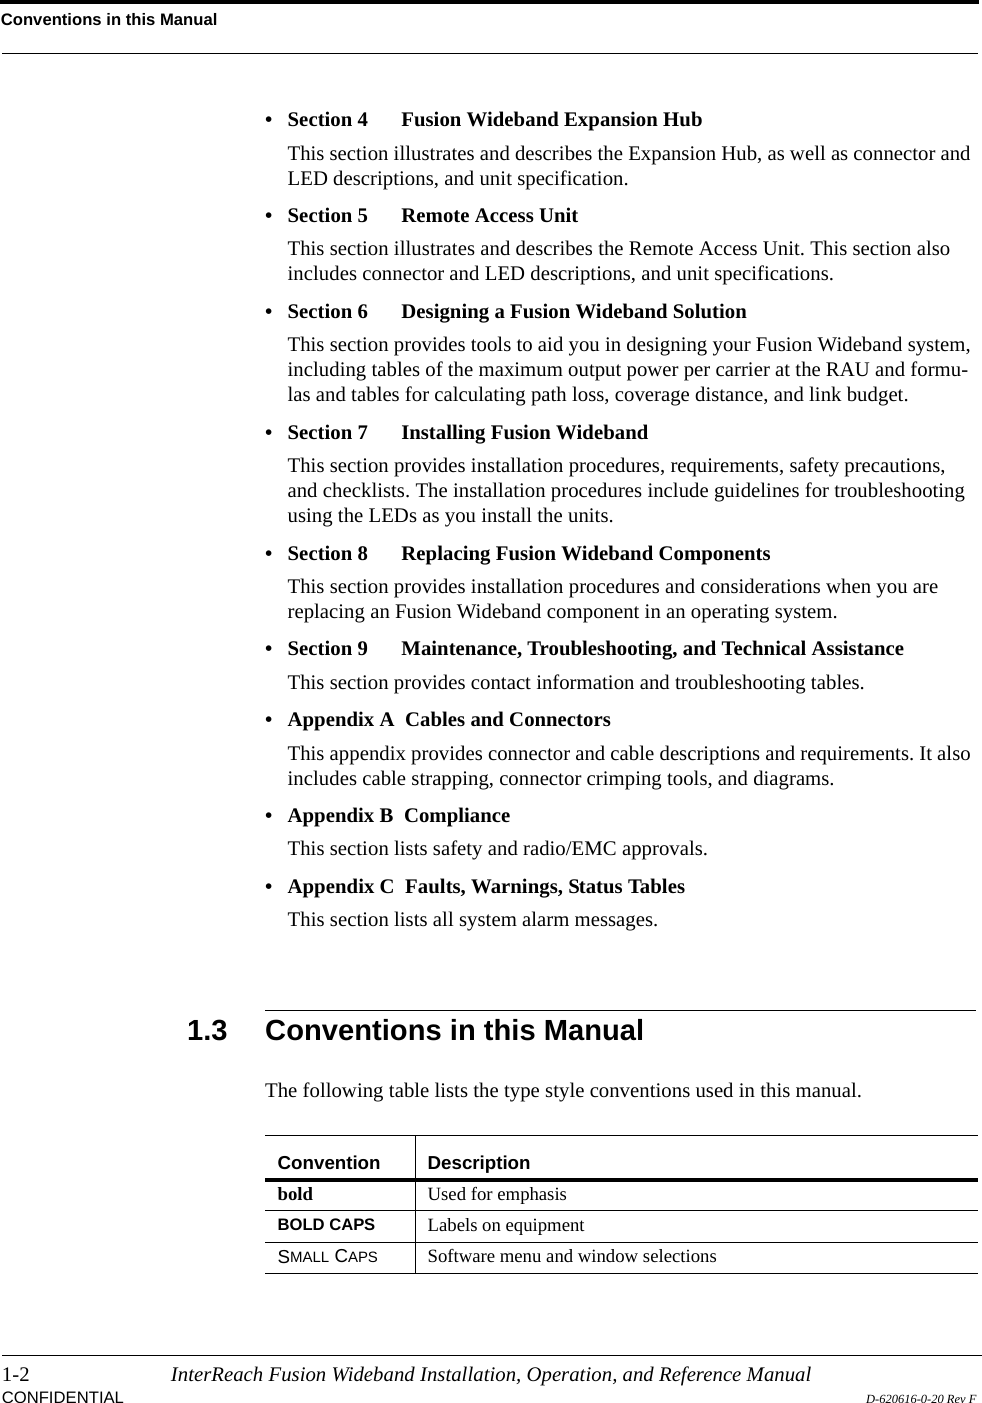 Conventions in this Manual1-2 InterReach Fusion Wideband Installation, Operation, and Reference ManualCONFIDENTIAL D-620616-0-20 Rev F• Section 4   Fusion Wideband Expansion HubThis section illustrates and describes the Expansion Hub, as well as connector and LED descriptions, and unit specification.• Section 5   Remote Access UnitThis section illustrates and describes the Remote Access Unit. This section also includes connector and LED descriptions, and unit specifications.• Section 6   Designing a Fusion Wideband SolutionThis section provides tools to aid you in designing your Fusion Wideband system, including tables of the maximum output power per carrier at the RAU and formu-las and tables for calculating path loss, coverage distance, and link budget.• Section 7   Installing Fusion WidebandThis section provides installation procedures, requirements, safety precautions, and checklists. The installation procedures include guidelines for troubleshooting using the LEDs as you install the units.• Section 8   Replacing Fusion Wideband ComponentsThis section provides installation procedures and considerations when you are replacing an Fusion Wideband component in an operating system.• Section 9  Maintenance, Troubleshooting, and Technical AssistanceThis section provides contact information and troubleshooting tables.• Appendix A  Cables and ConnectorsThis appendix provides connector and cable descriptions and requirements. It also includes cable strapping, connector crimping tools, and diagrams.• Appendix B  ComplianceThis section lists safety and radio/EMC approvals.• Appendix C  Faults, Warnings, Status TablesThis section lists all system alarm messages.1.3 Conventions in this ManualThe following table lists the type style conventions used in this manual.Convention Descriptionbold Used for emphasisBOLD CAPS Labels on equipmentSMALL CAPS Software menu and window selections